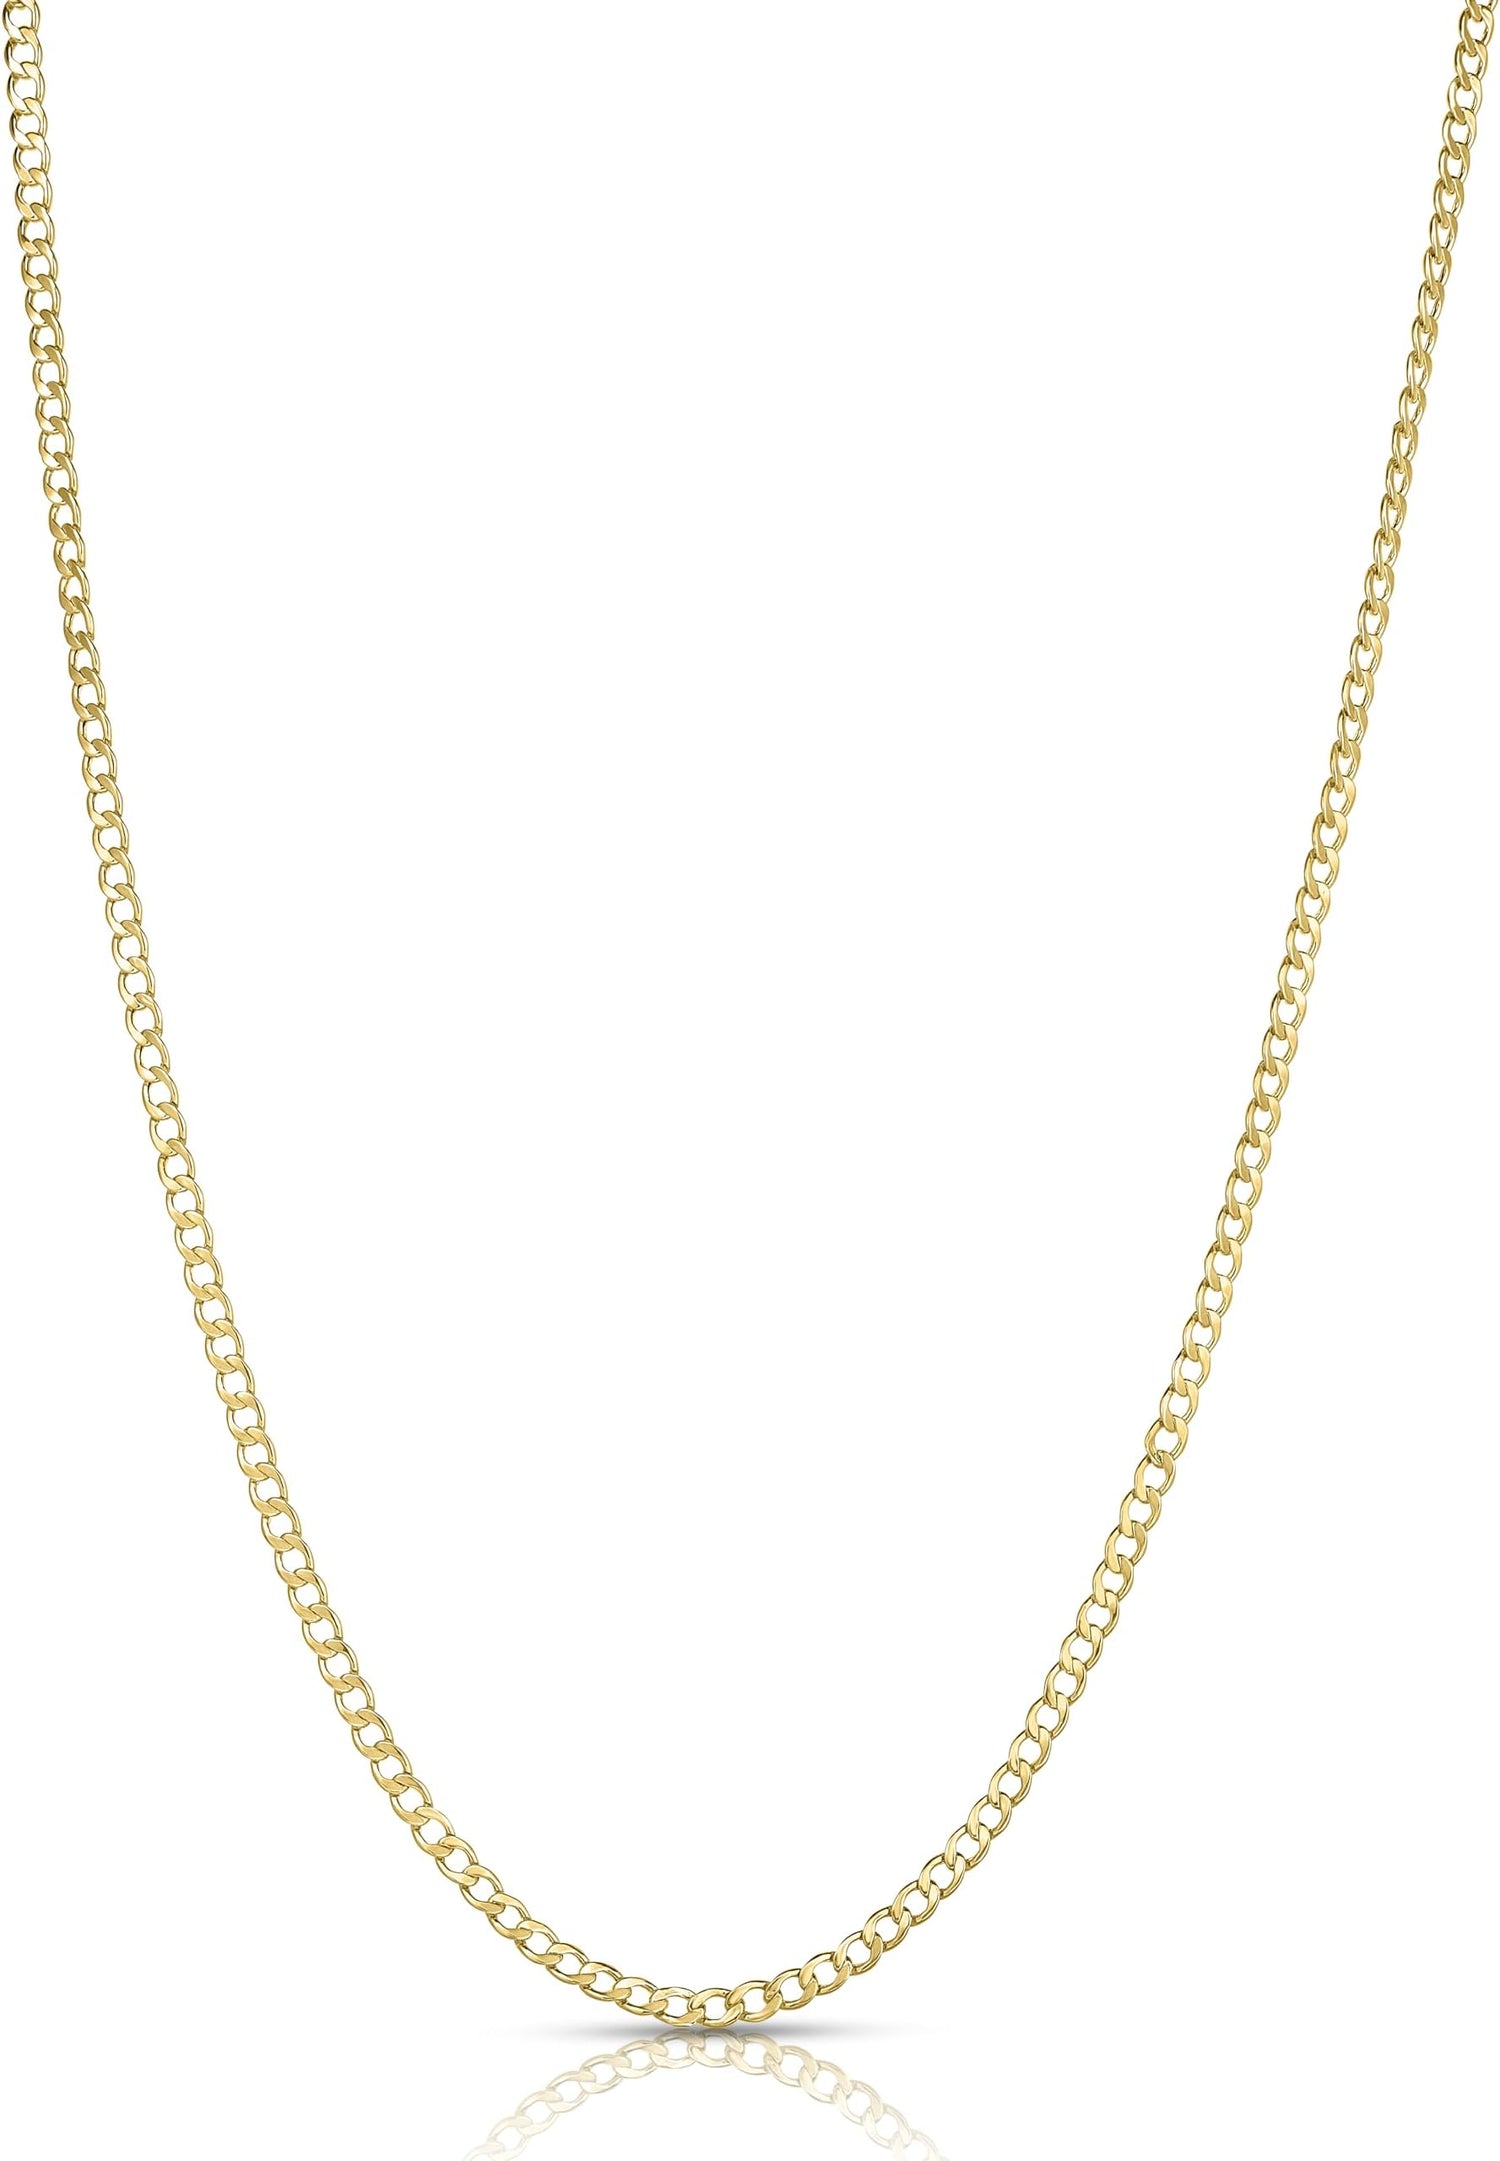 10k Yellow Gold 3mm Hollow Cuban Curb Link Chain Necklace